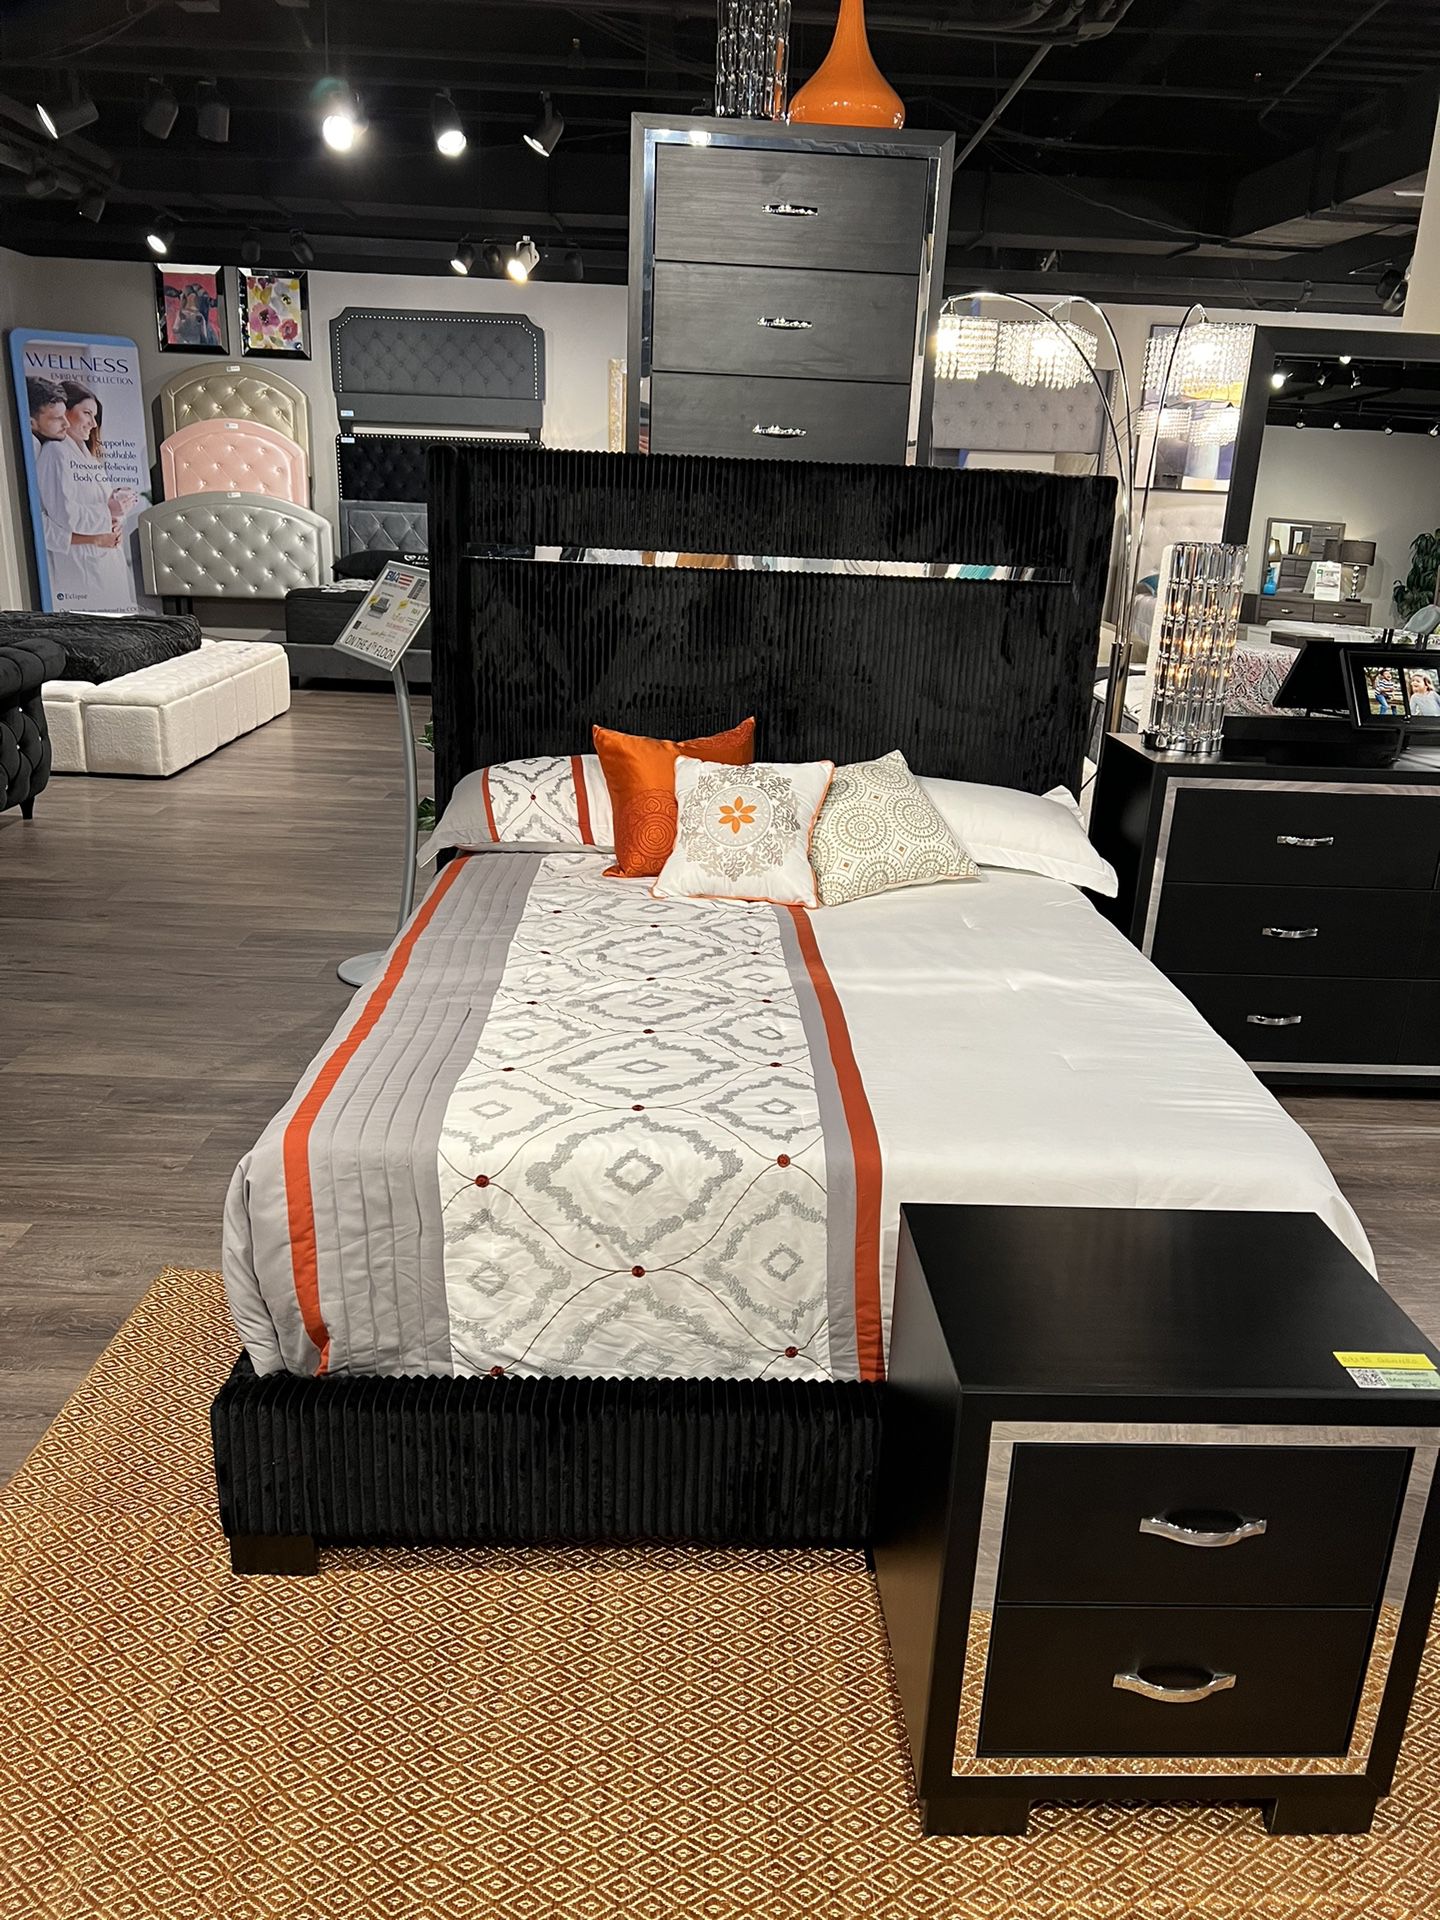 48 Months Payments Option For New Bedroom Sets